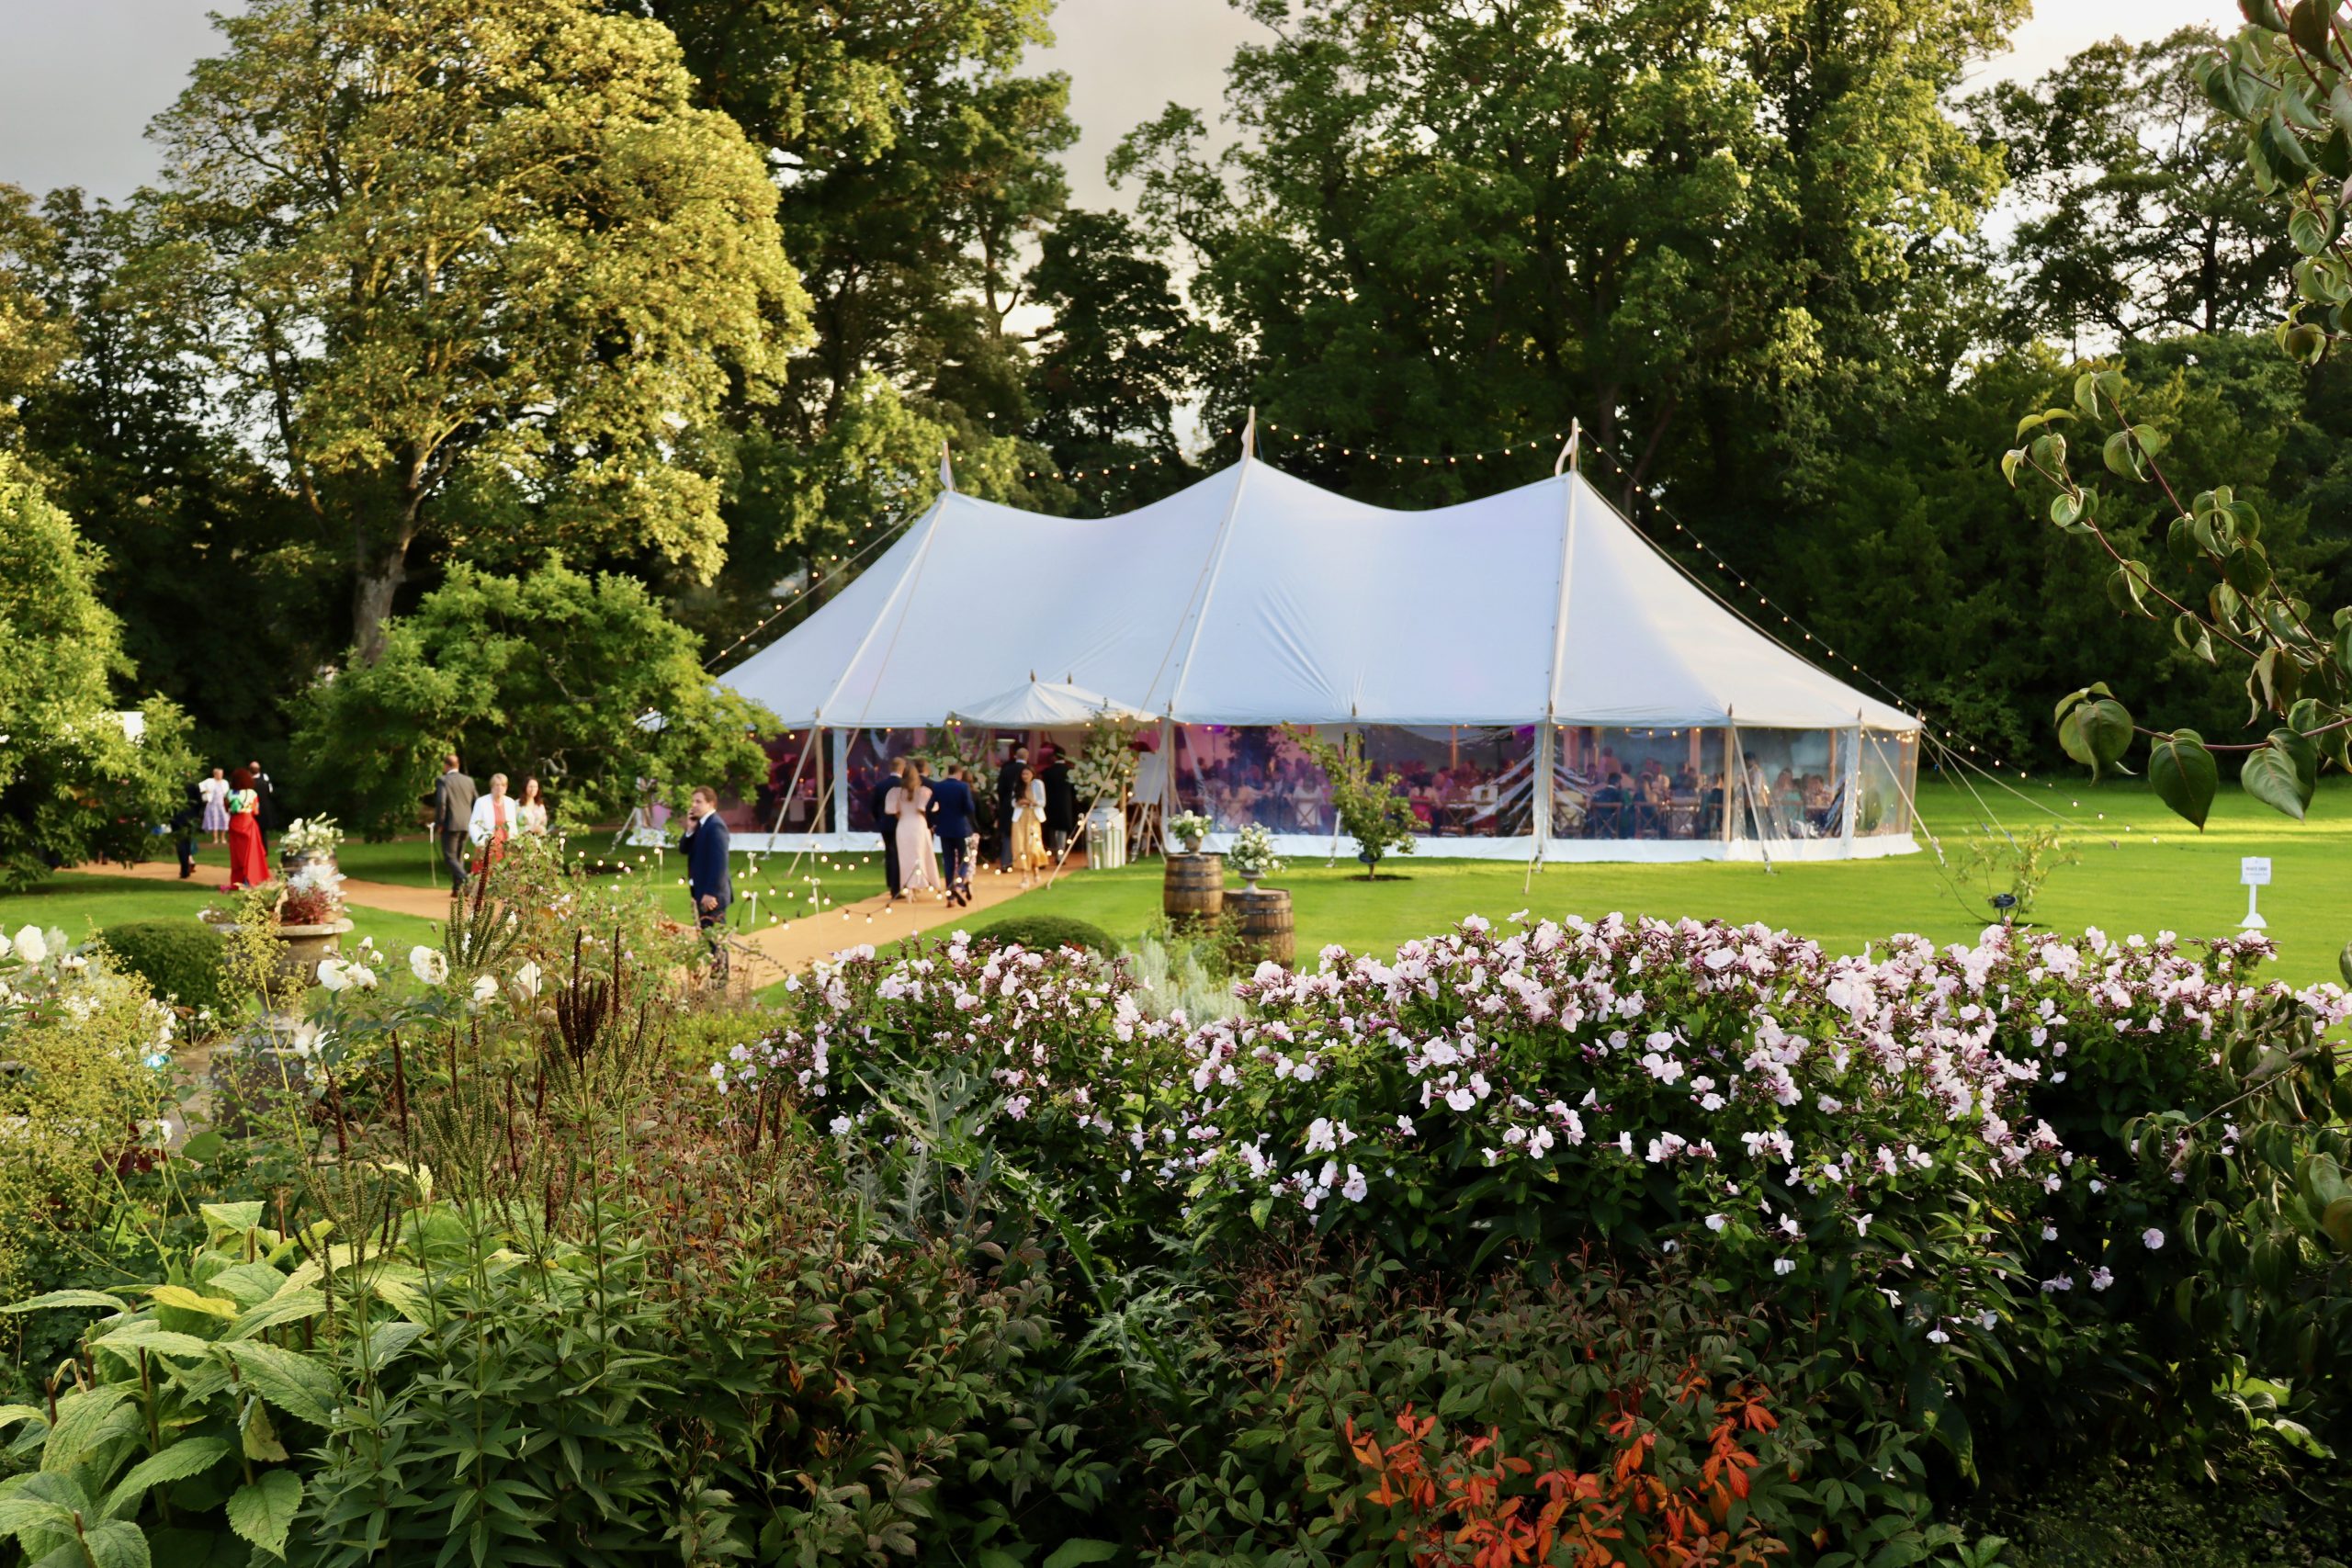 Traditional pole marquee wedding in a beautiful garden space